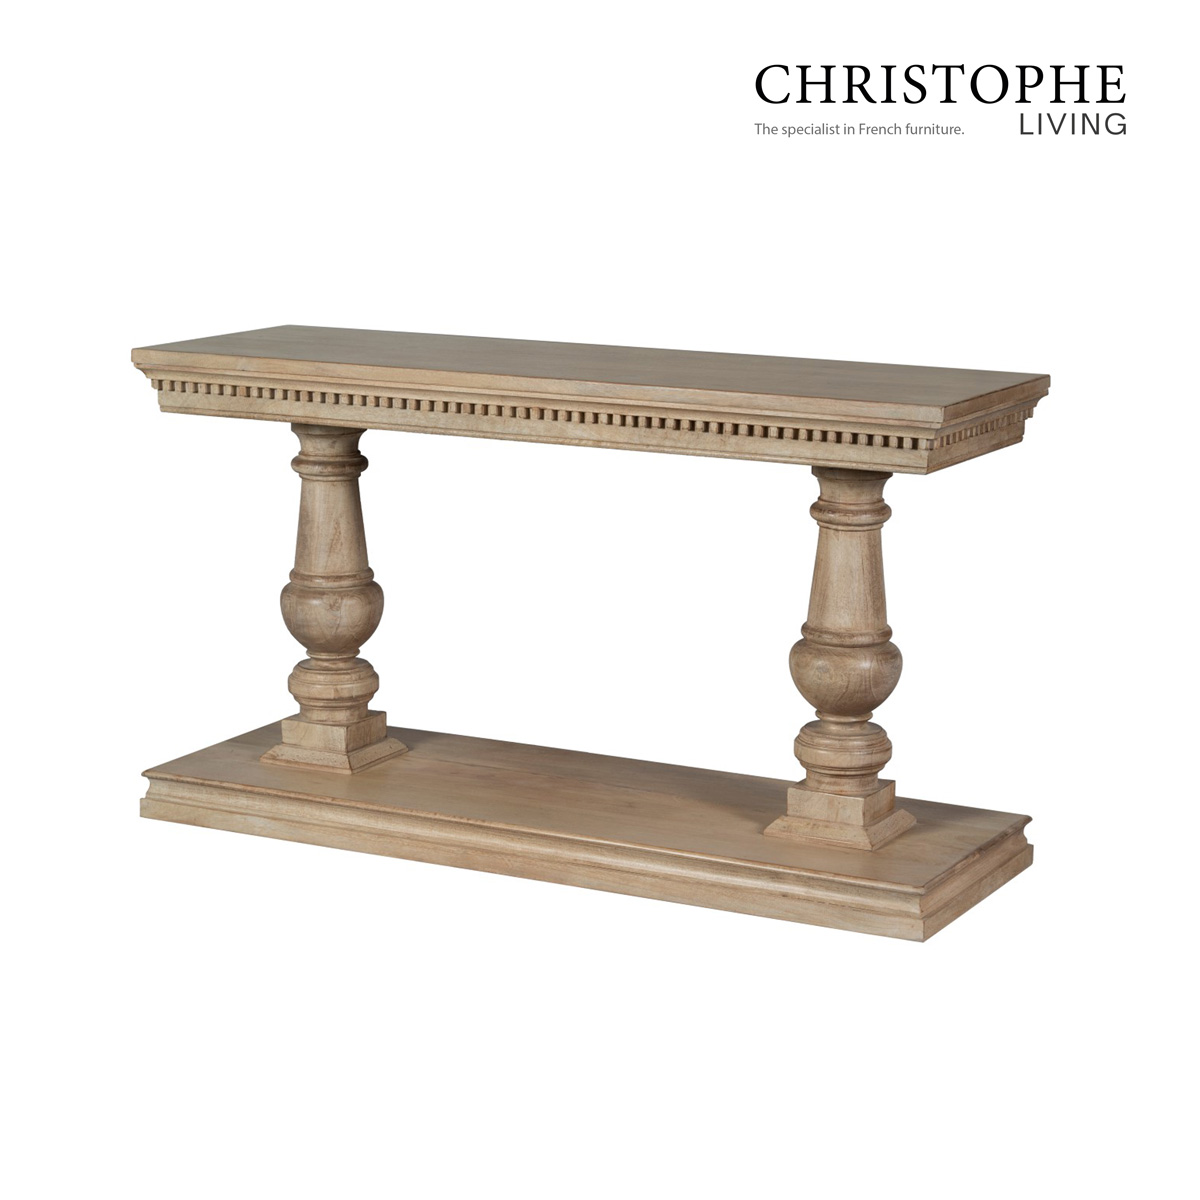 Valentino French Provincial Console Table - Solid Timber in Light Walnut Finish for Living Room and Hallway